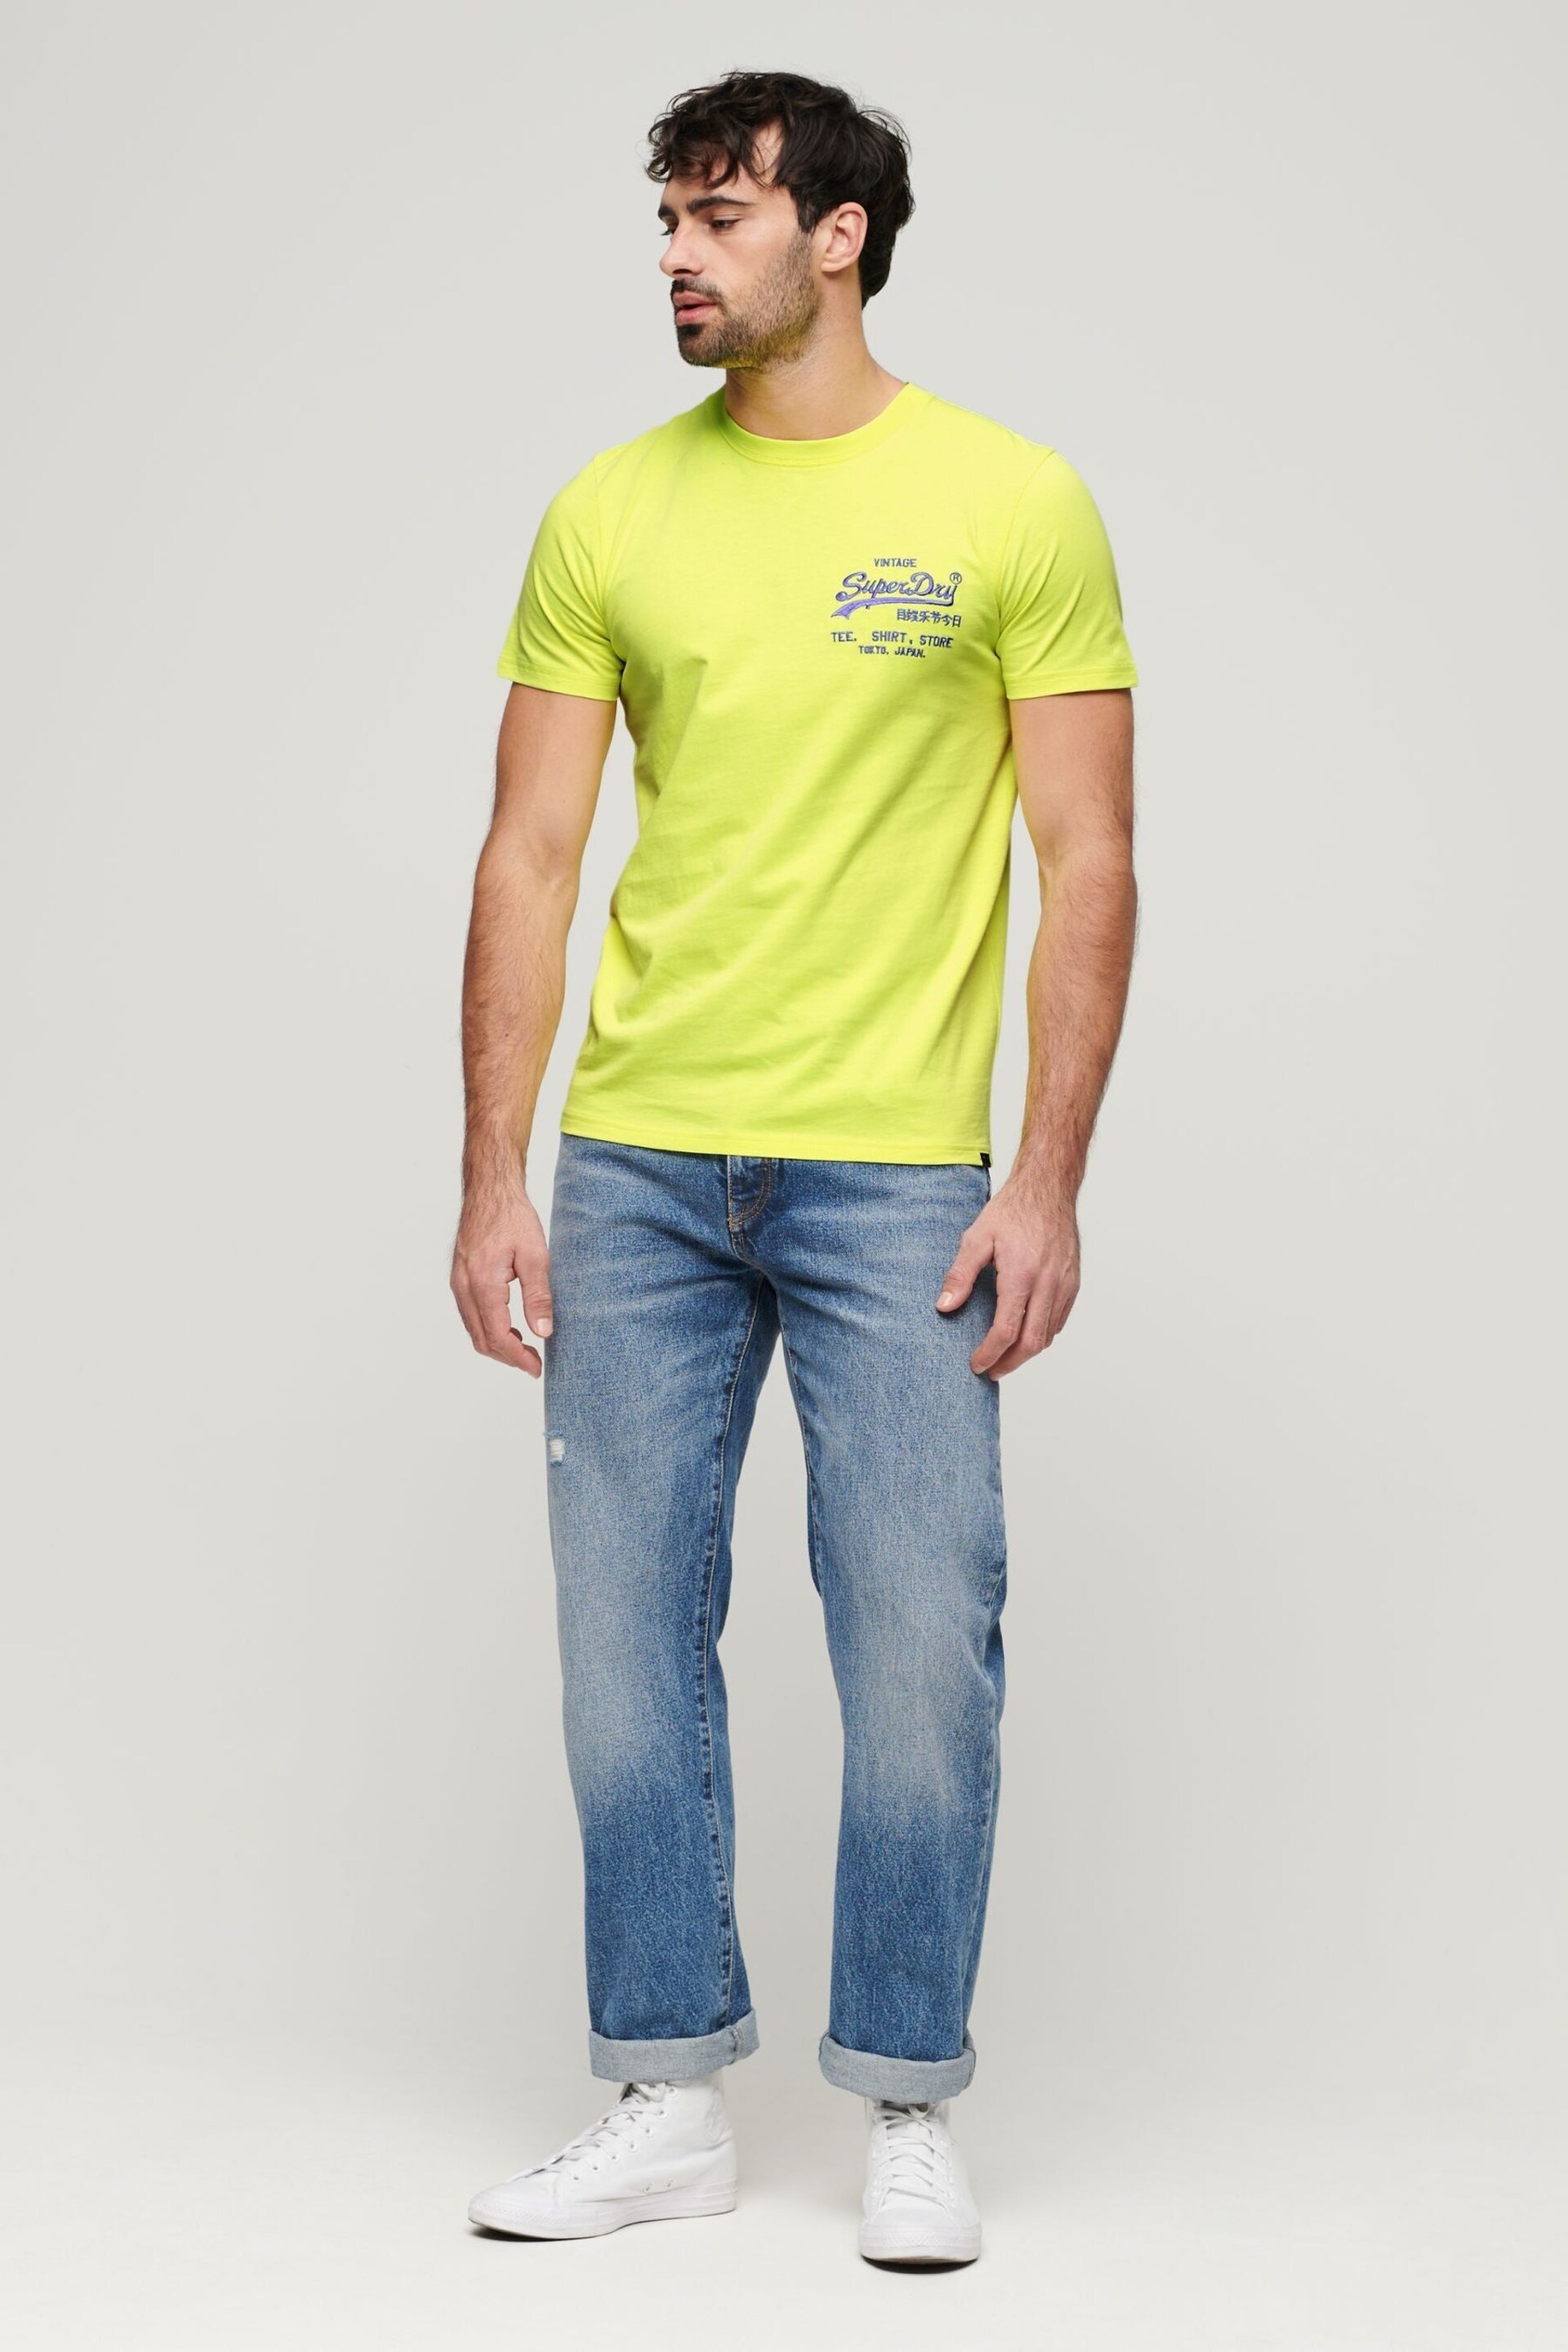 Superdry Neon Yellow Neon Vintage Logo T-Shirt - Image 2 of 3